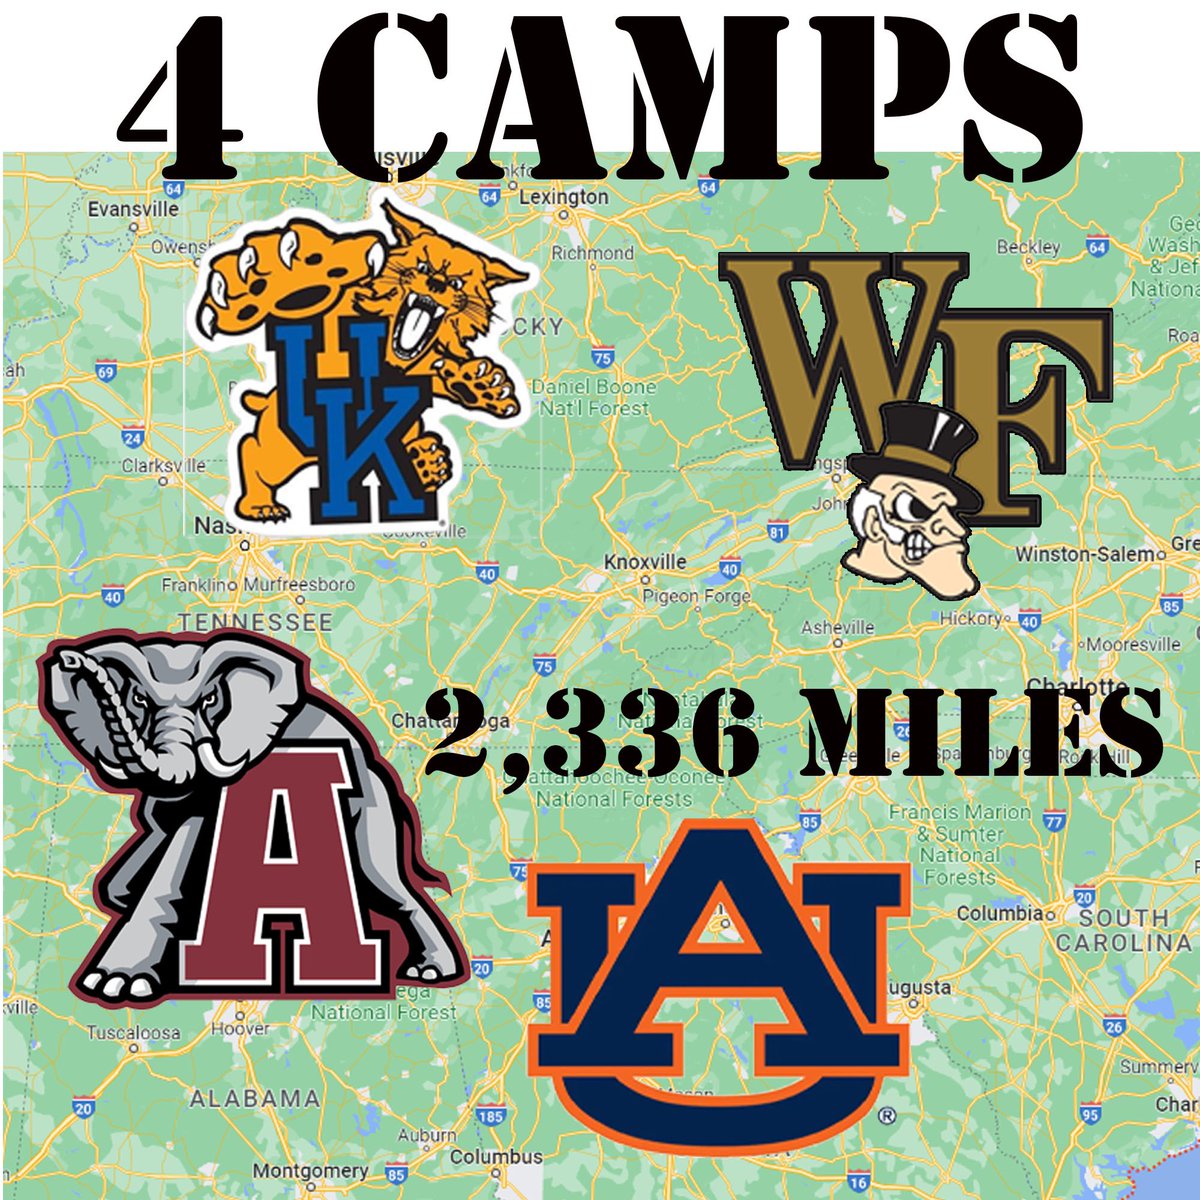 I had a great time competing against the Top Longsnappers in the country.  4 Camps- 6 Days-2,336miles!  @RyanSchutta @CoachHutzler @Coachnmcgriff48 @CoachJ_Boulware @CoachTBurns @PaxtonM2 @TheChrisRubio @CoachMcgehee @CoachC_McGuire @Coach_ABurke @JCJetsFootball @JCFB_Recruiting